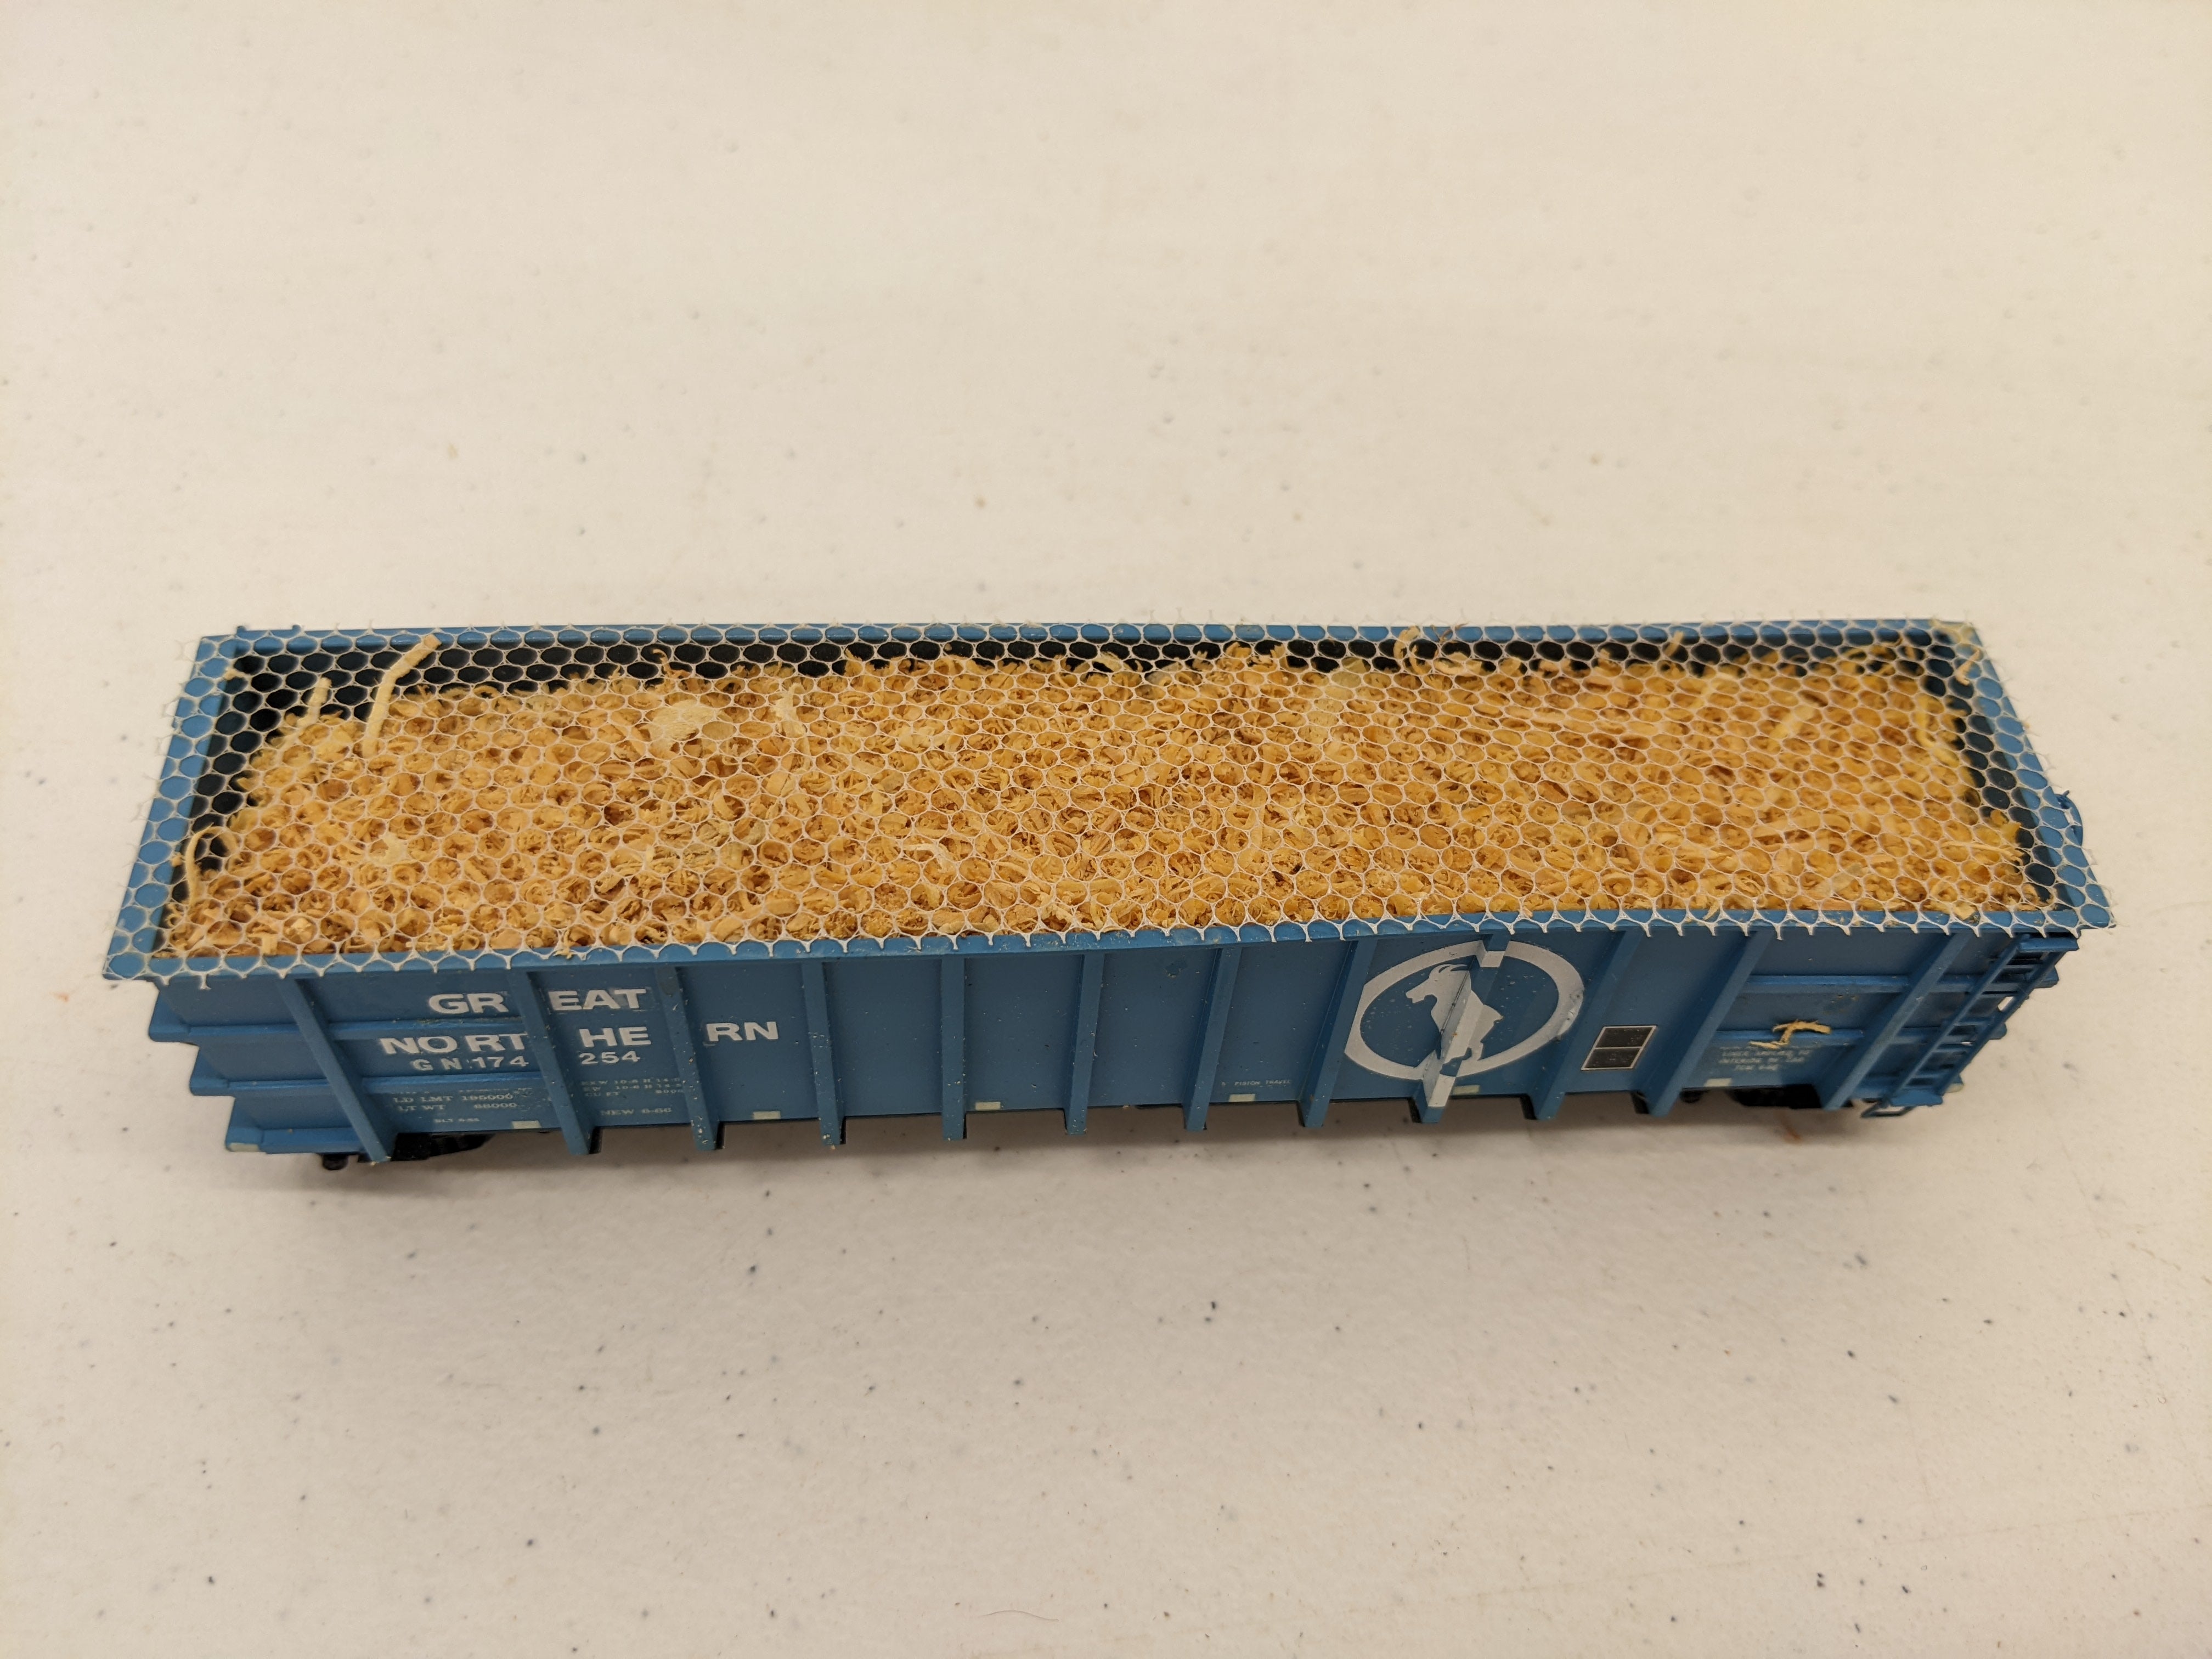 USED Roundhouse HO Scale, Thrall High Side Gondola with Custom Wood Chip Load, Great Northern GN #174254